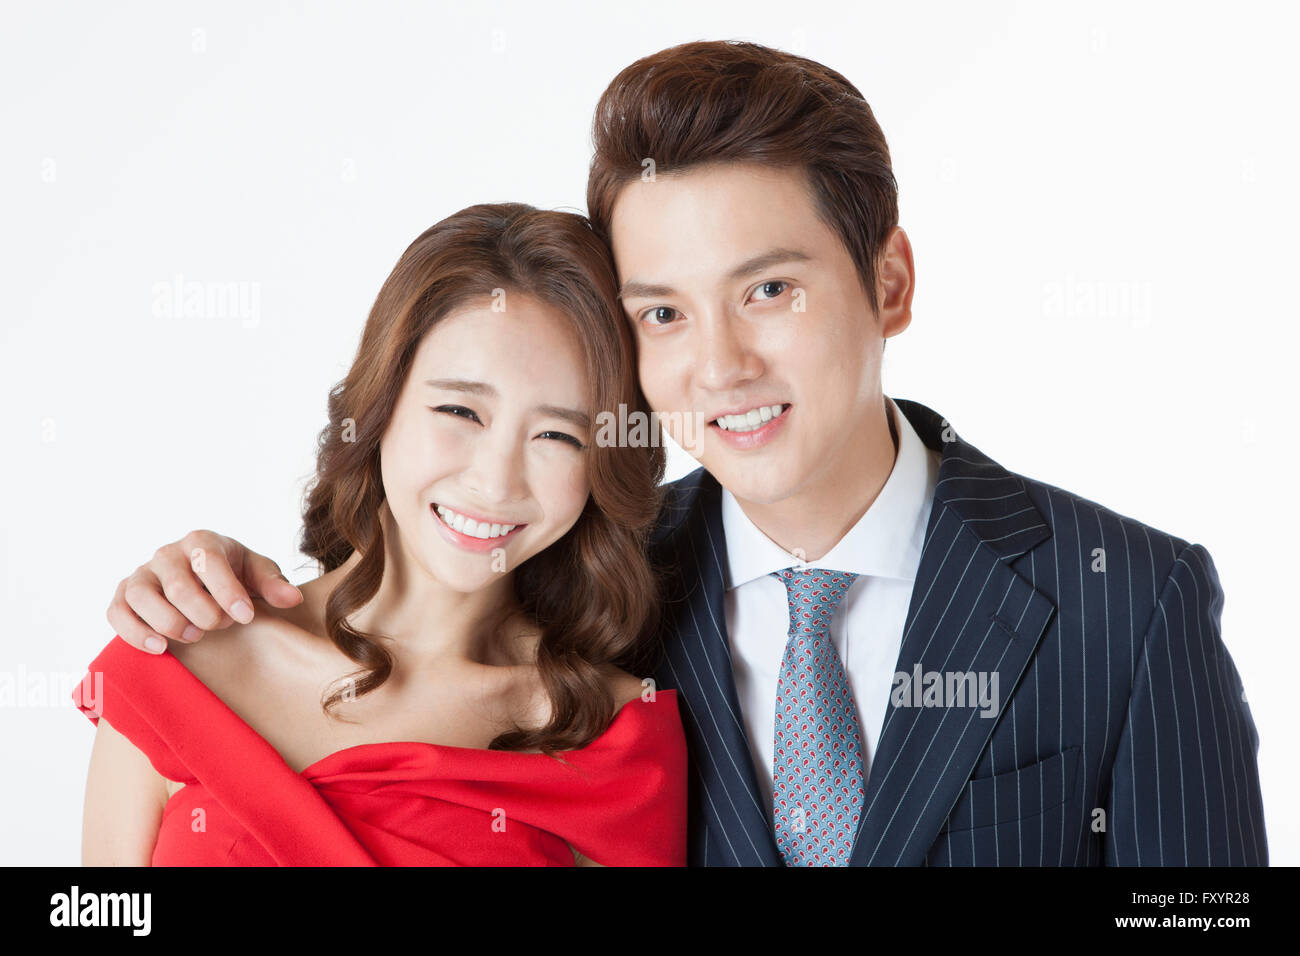 Portrait of young smiling couple staring at front Stock Photo